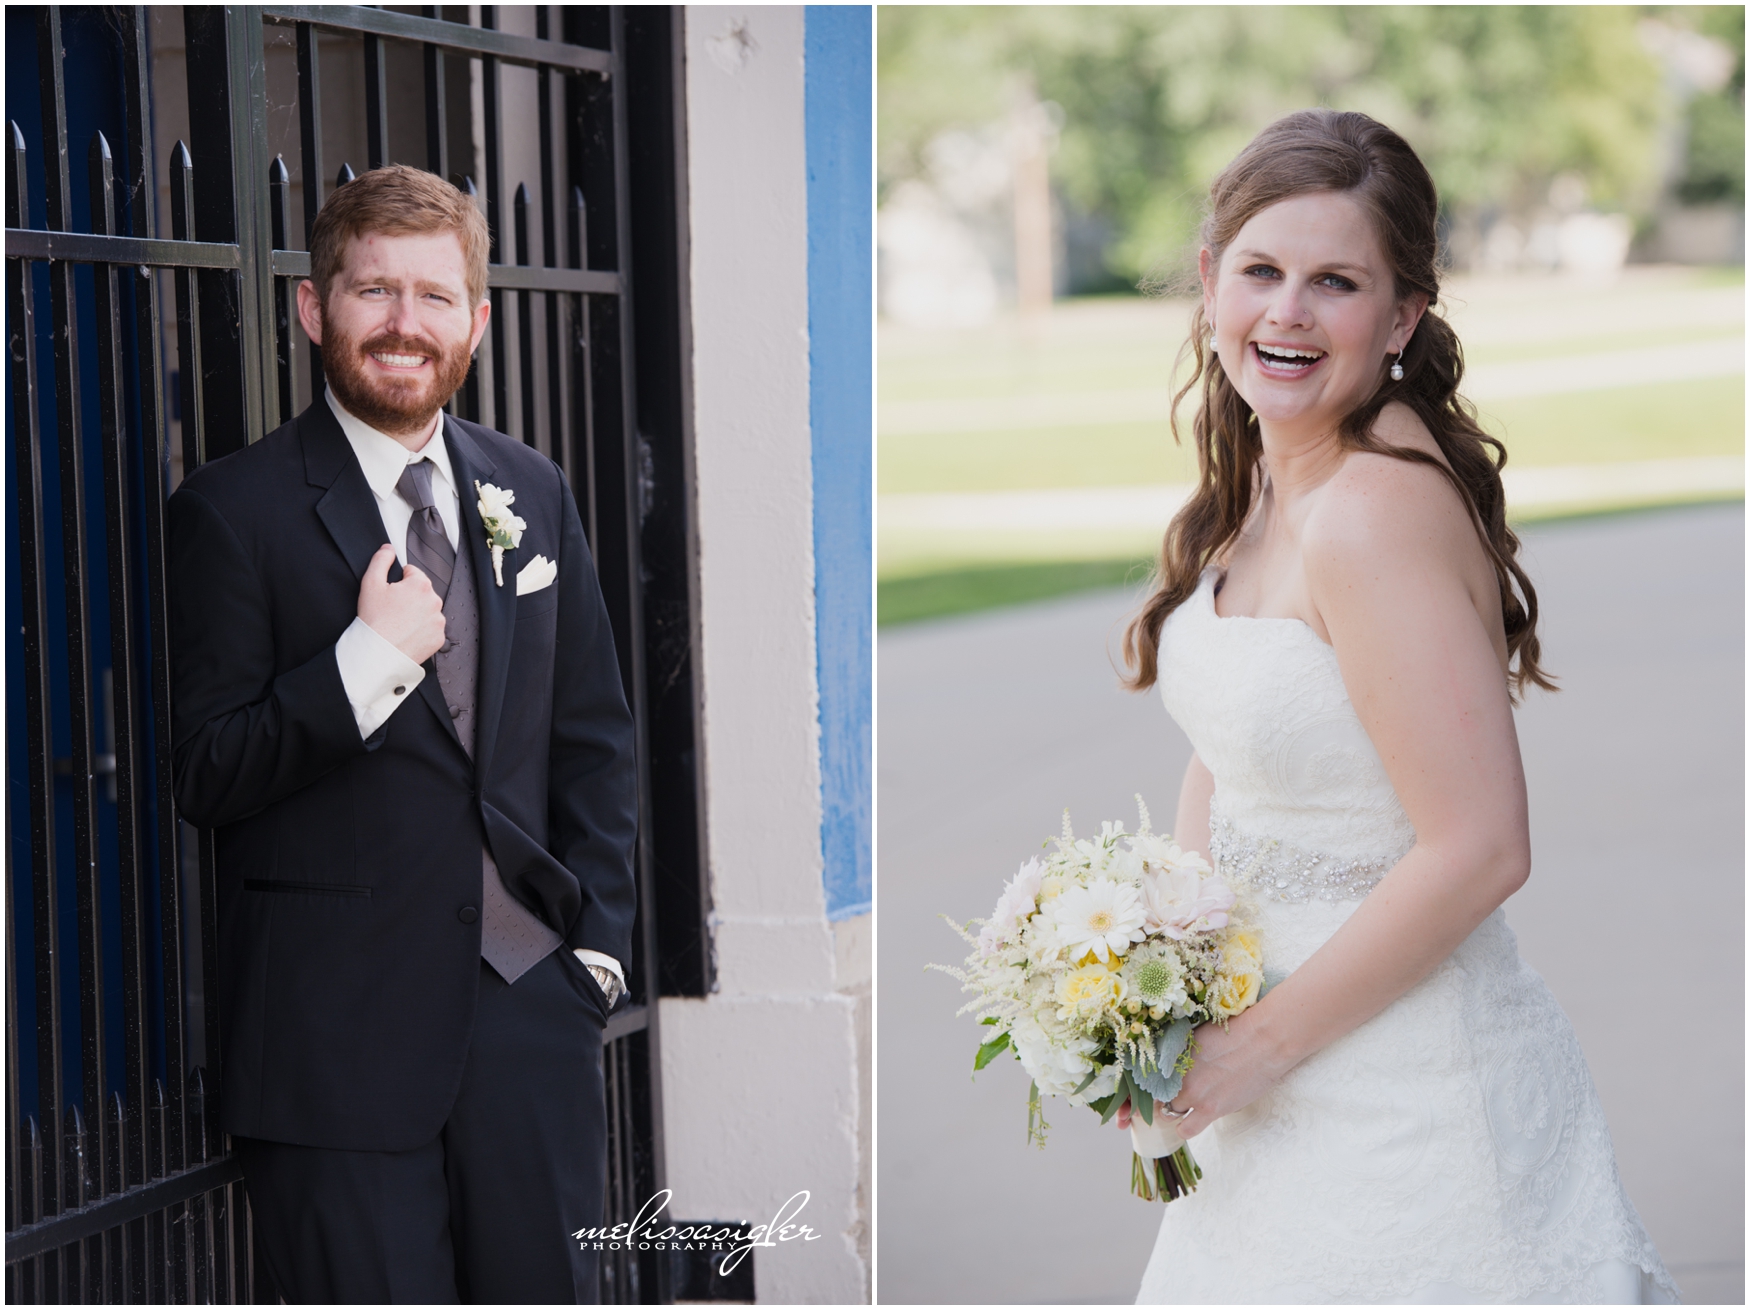 Wedding party at the University of Kansas by Melissa Sigler Photography